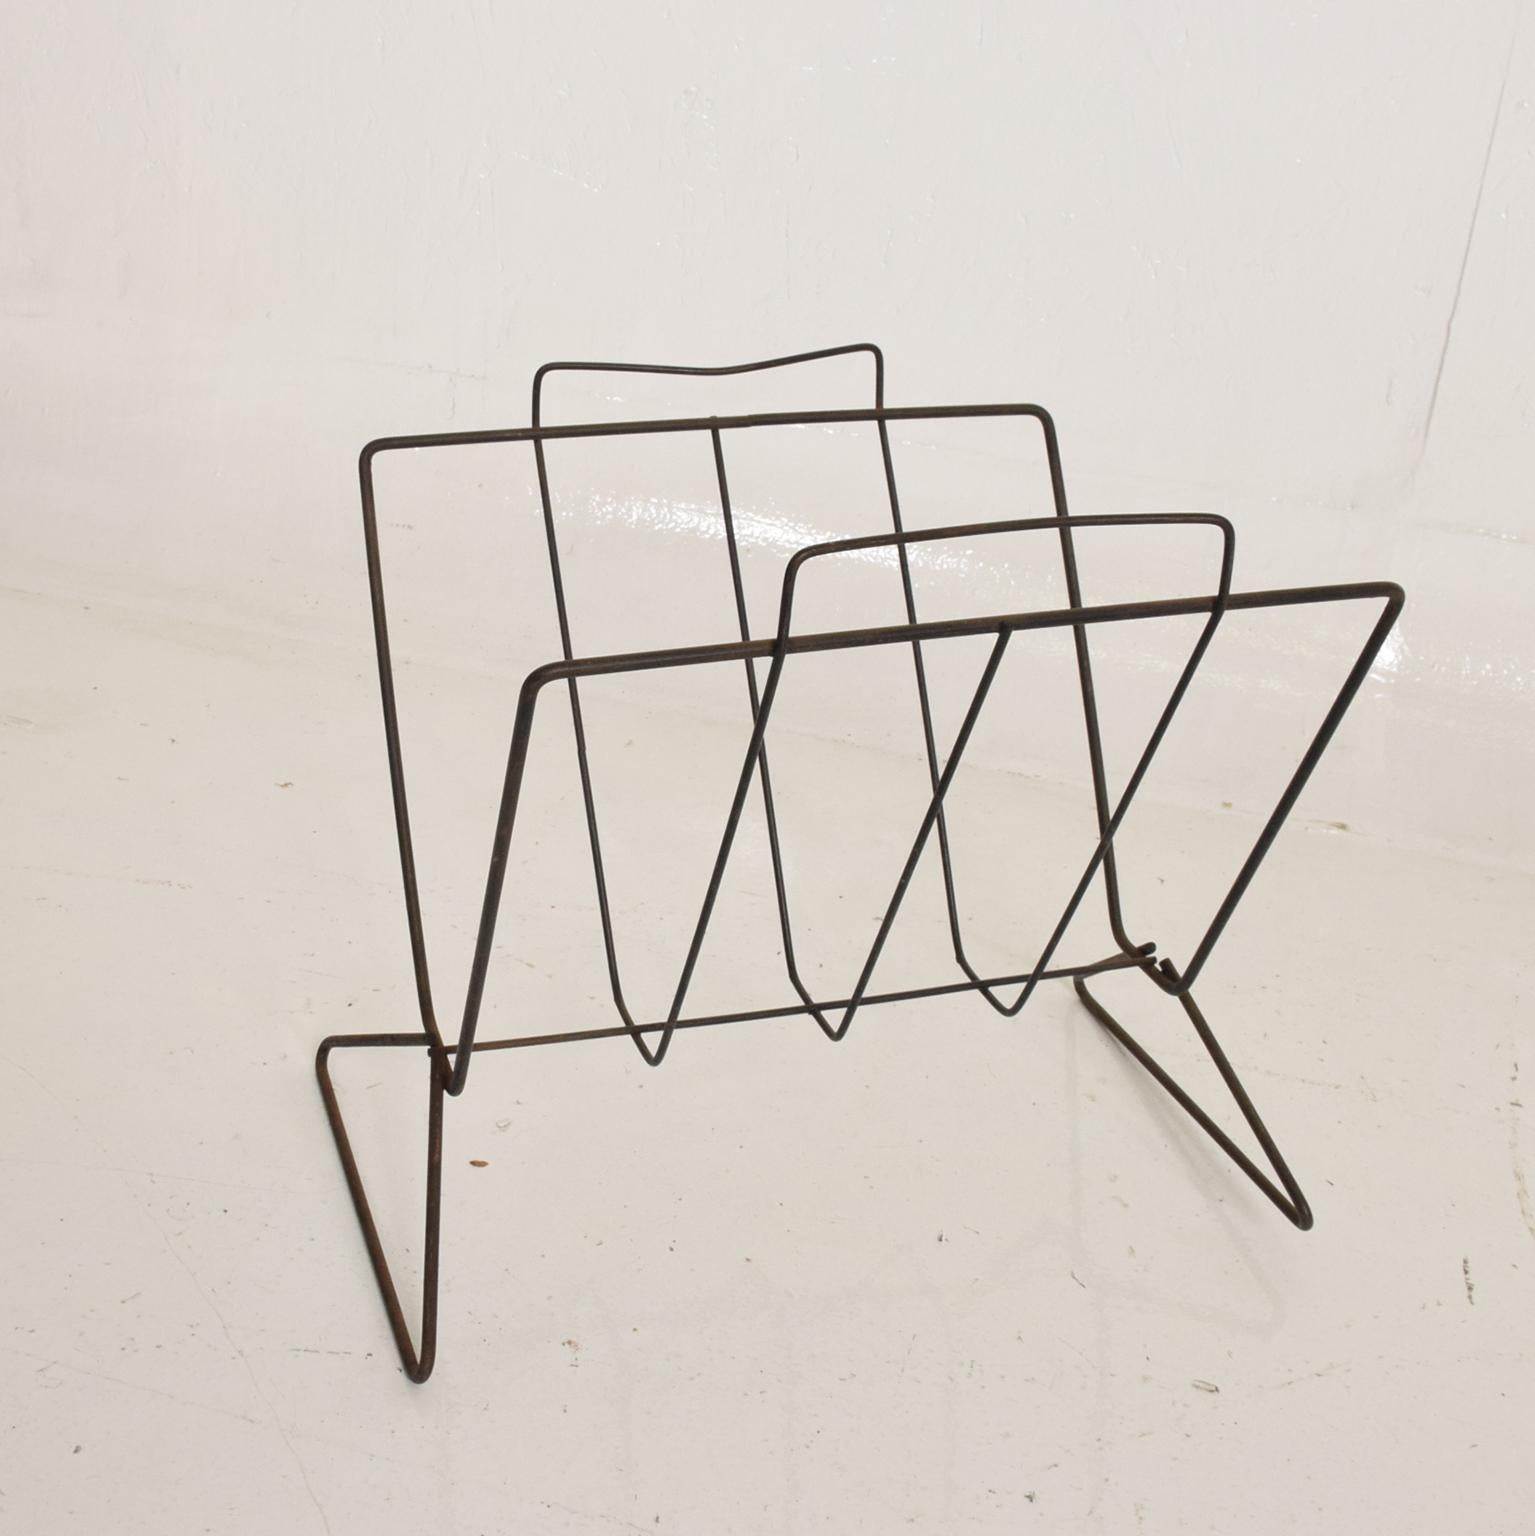 For your consideration, a Mid-Century Modern sculptural iron magazine rack.
Beautiful clean modern lines. The USA circa the 1960s.
Dimensions: TBD 12